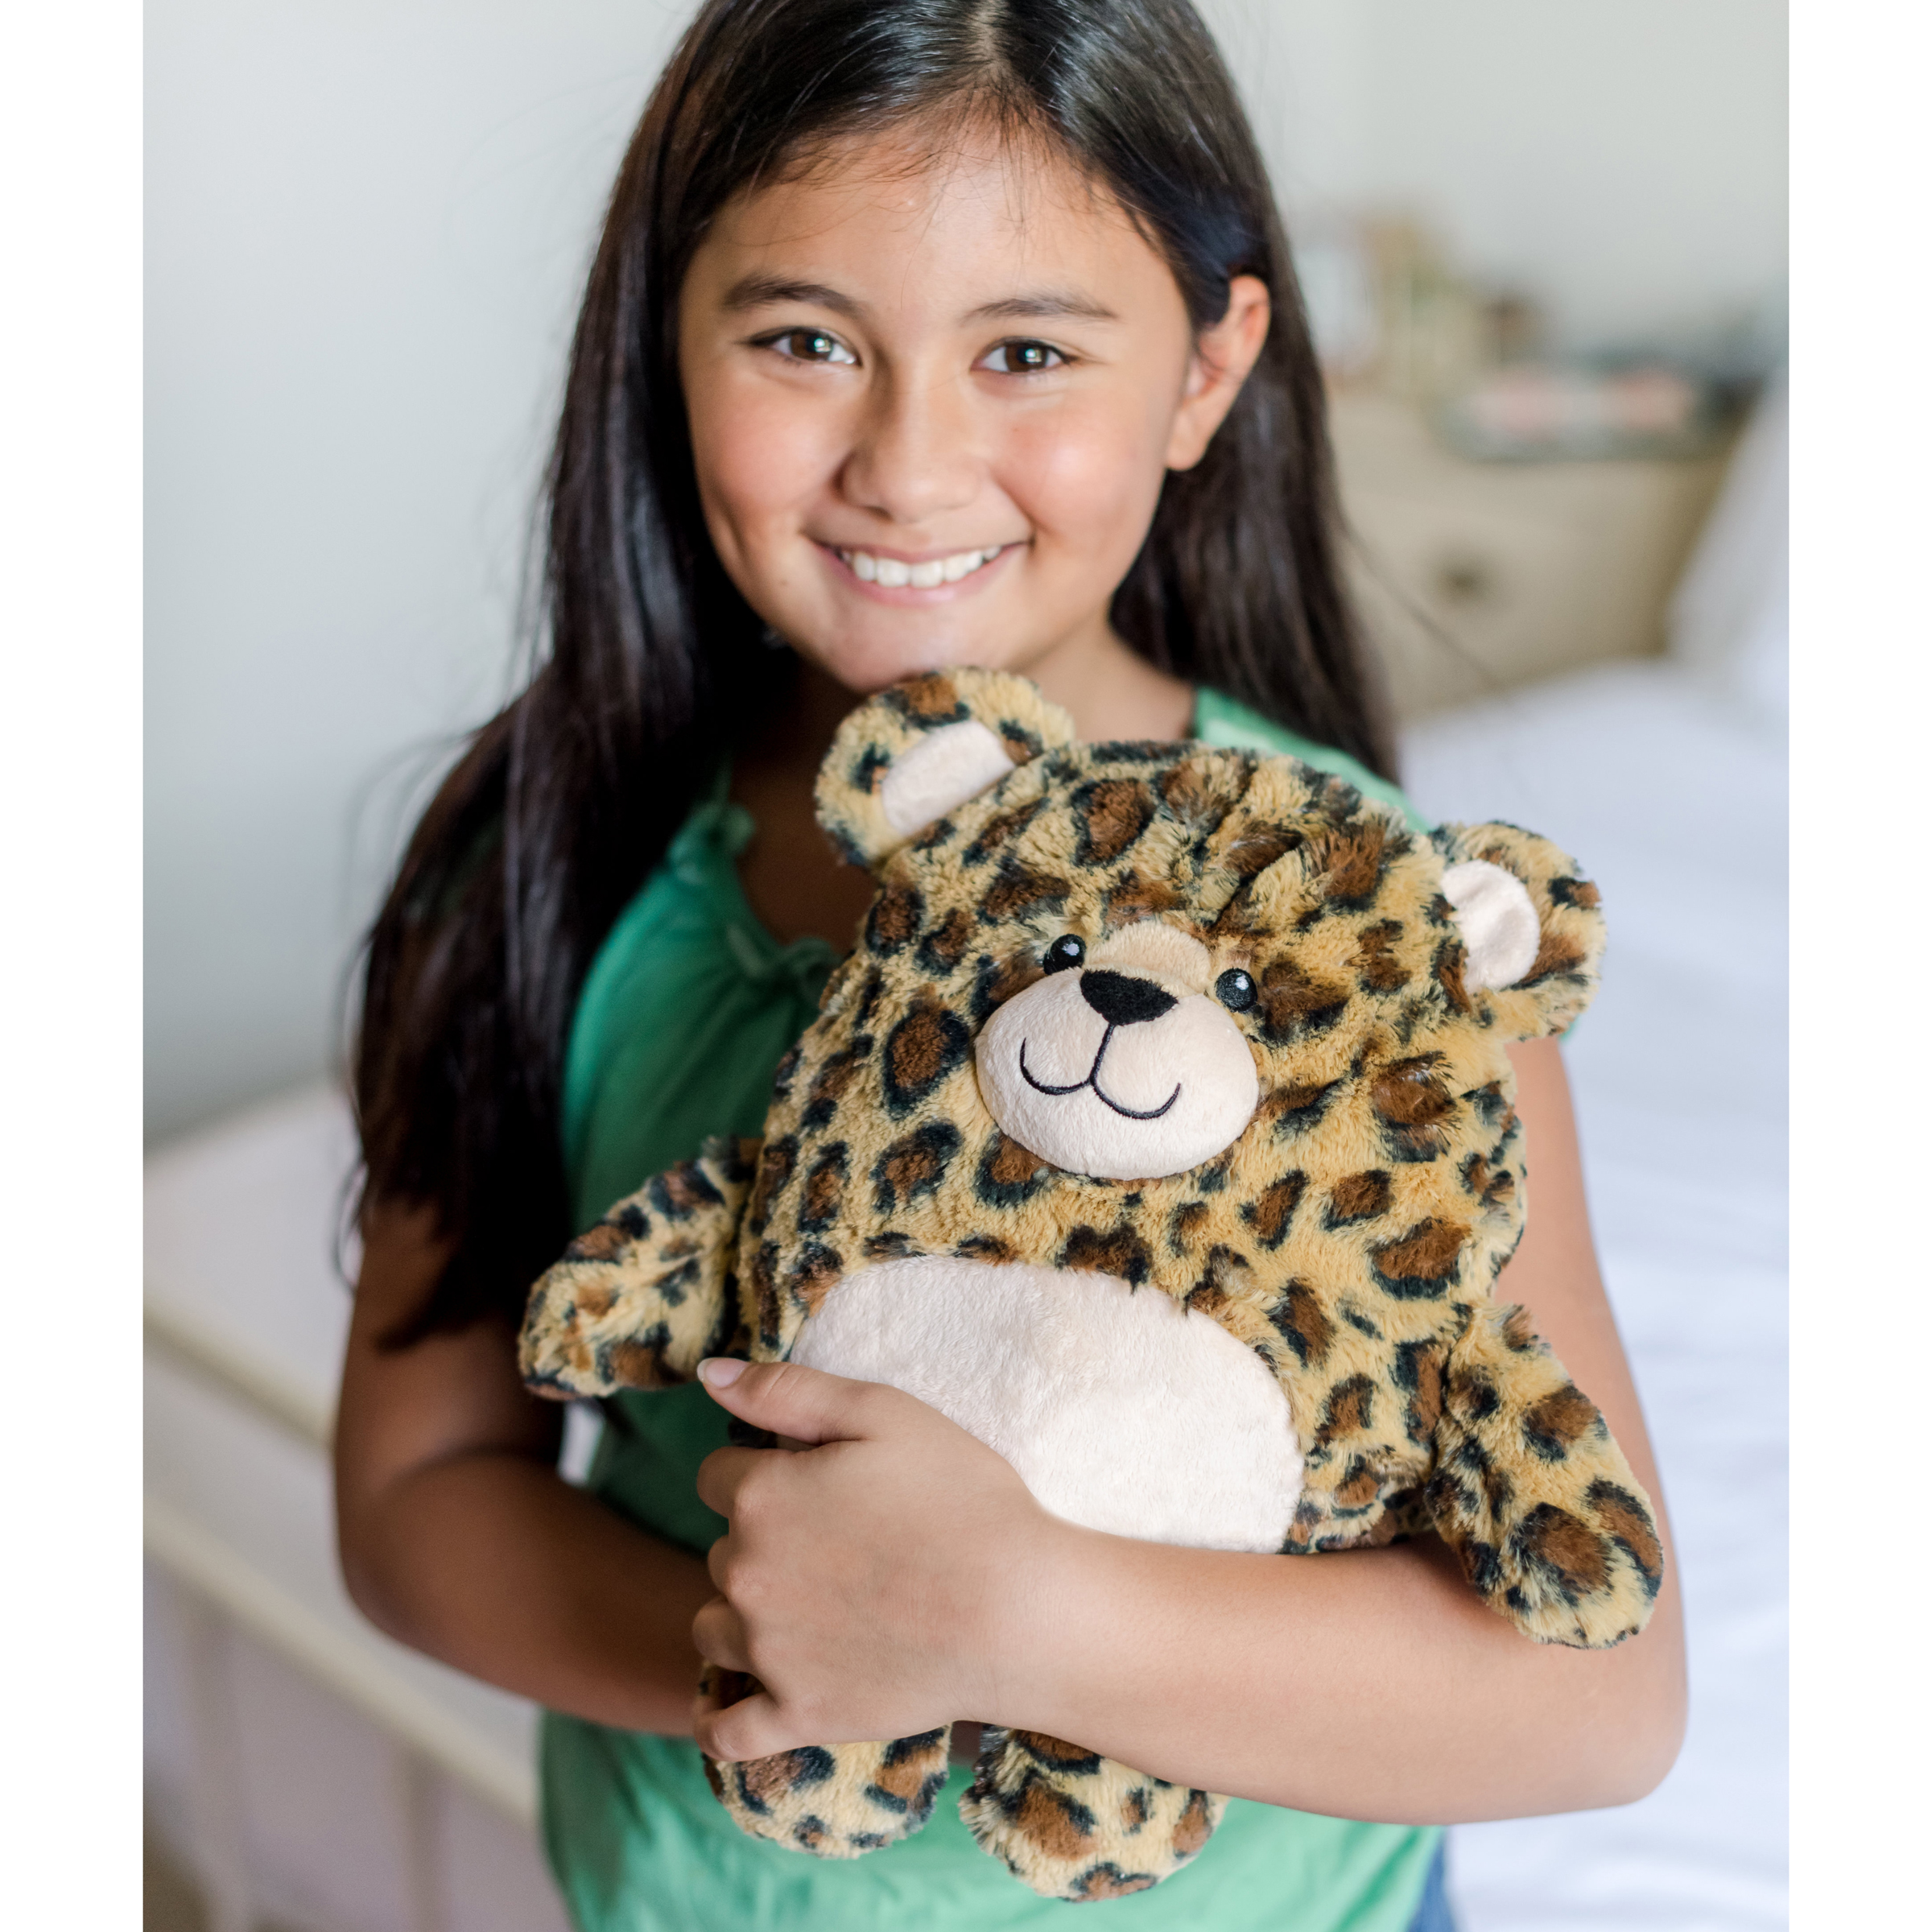 Animal Adventure Wild for Style™ 2-in-1 Transformable Cape 10" Leopard Plush Toy - image 5 of 7